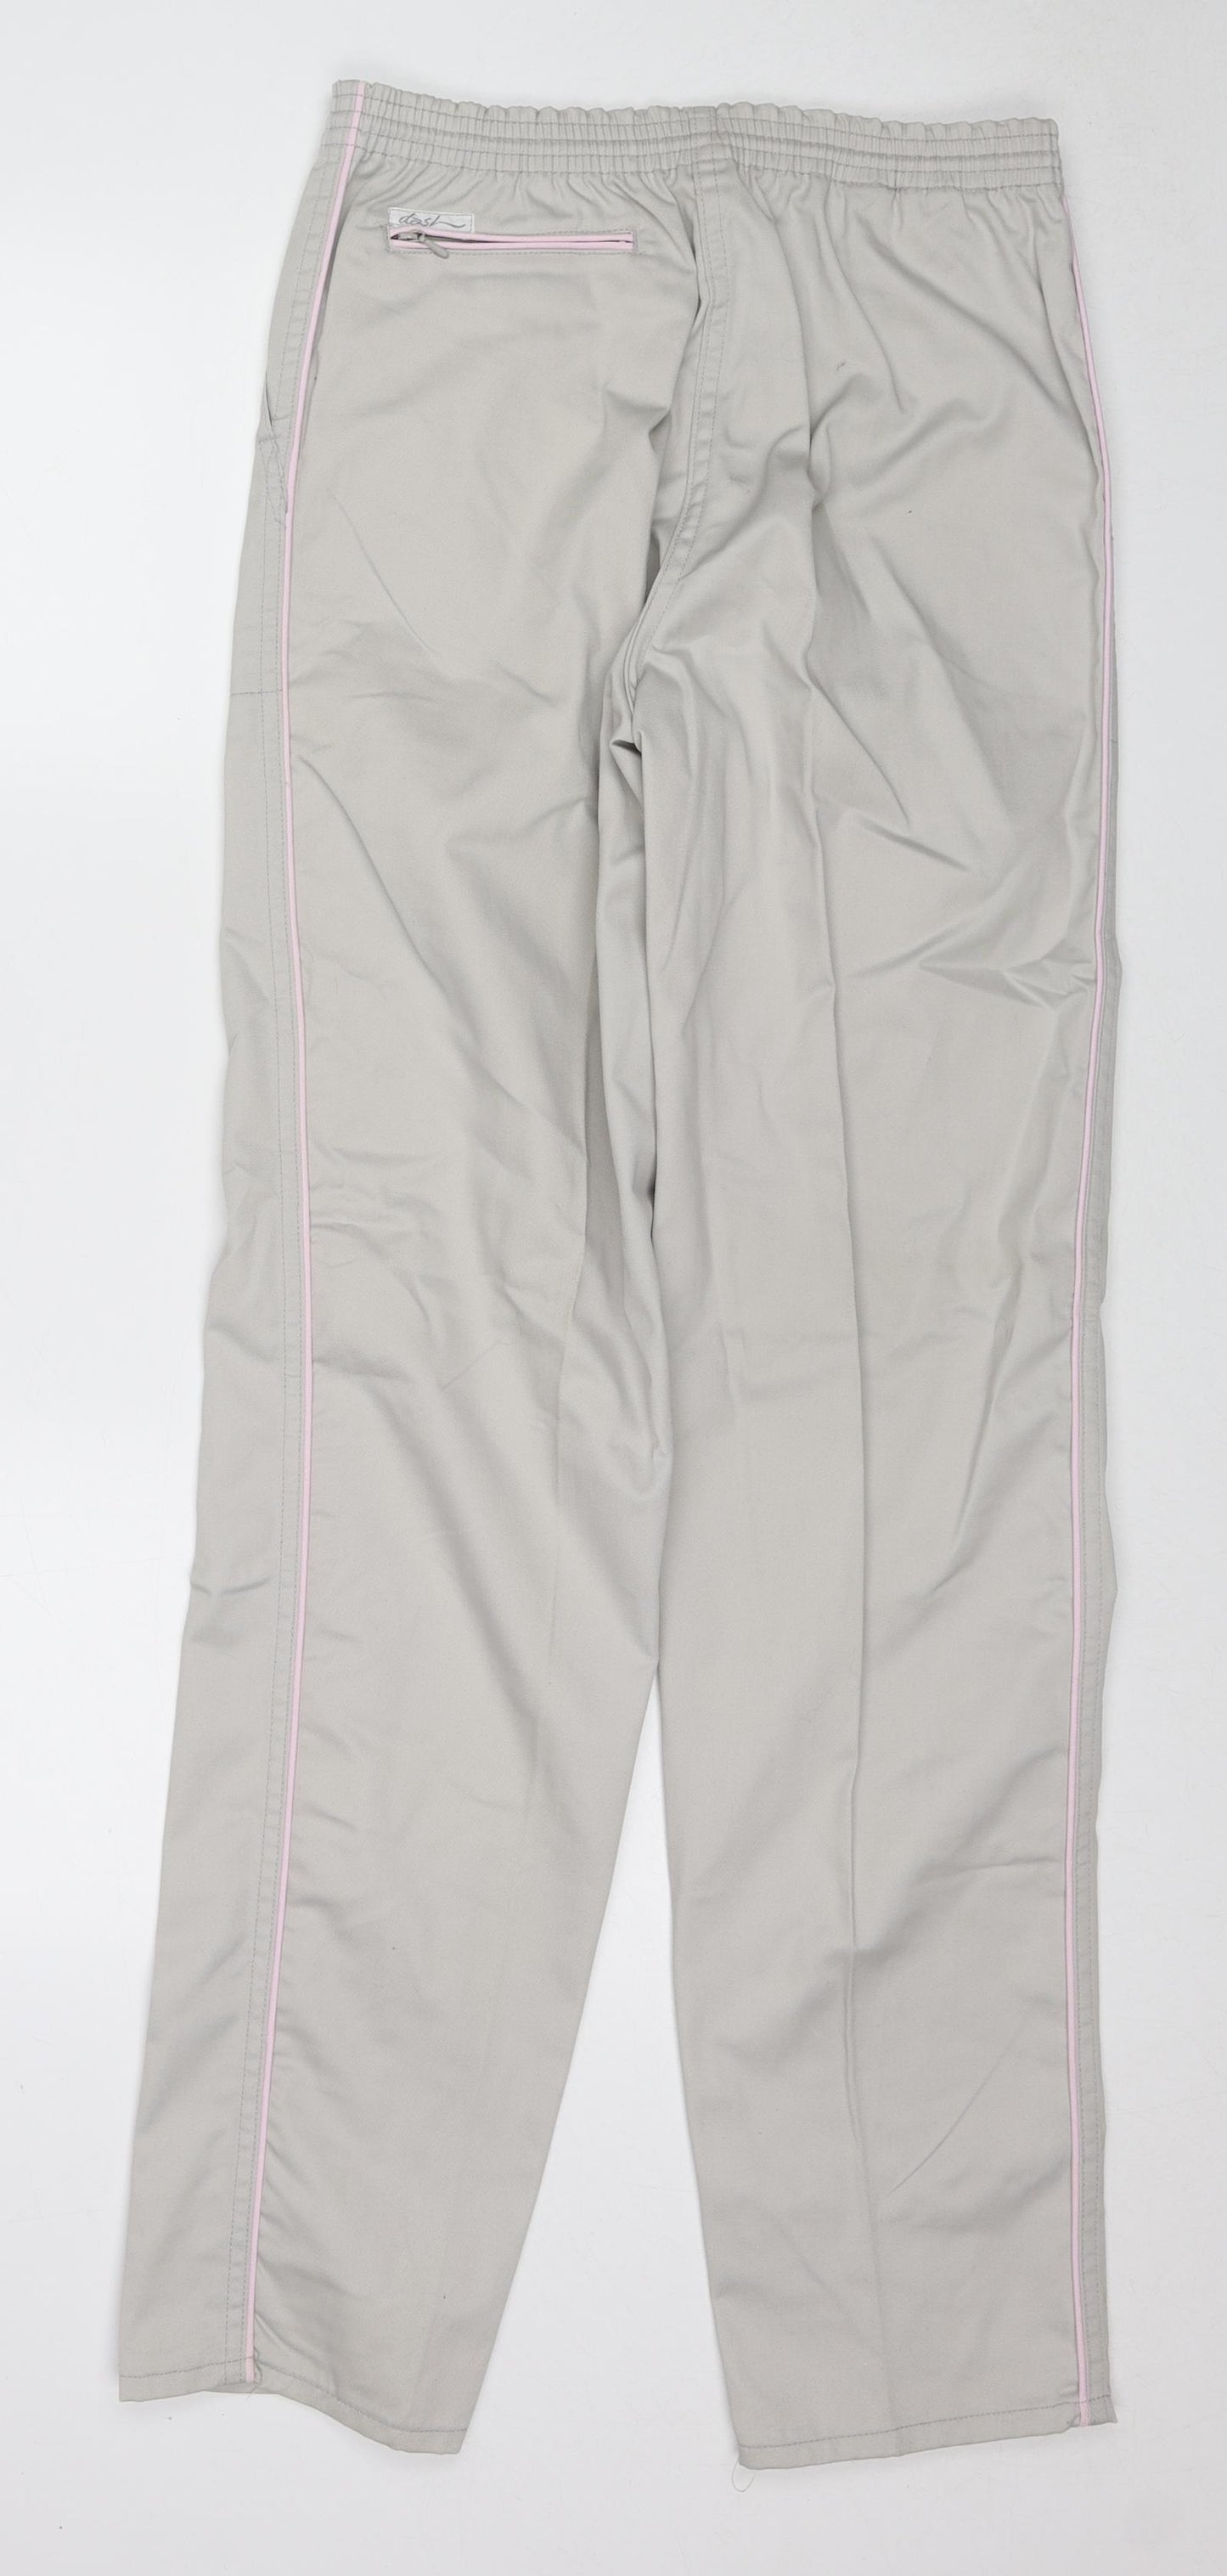 DASH Womens Beige Polyester Trousers Size M L33 in Regular - Pink Piping Detail